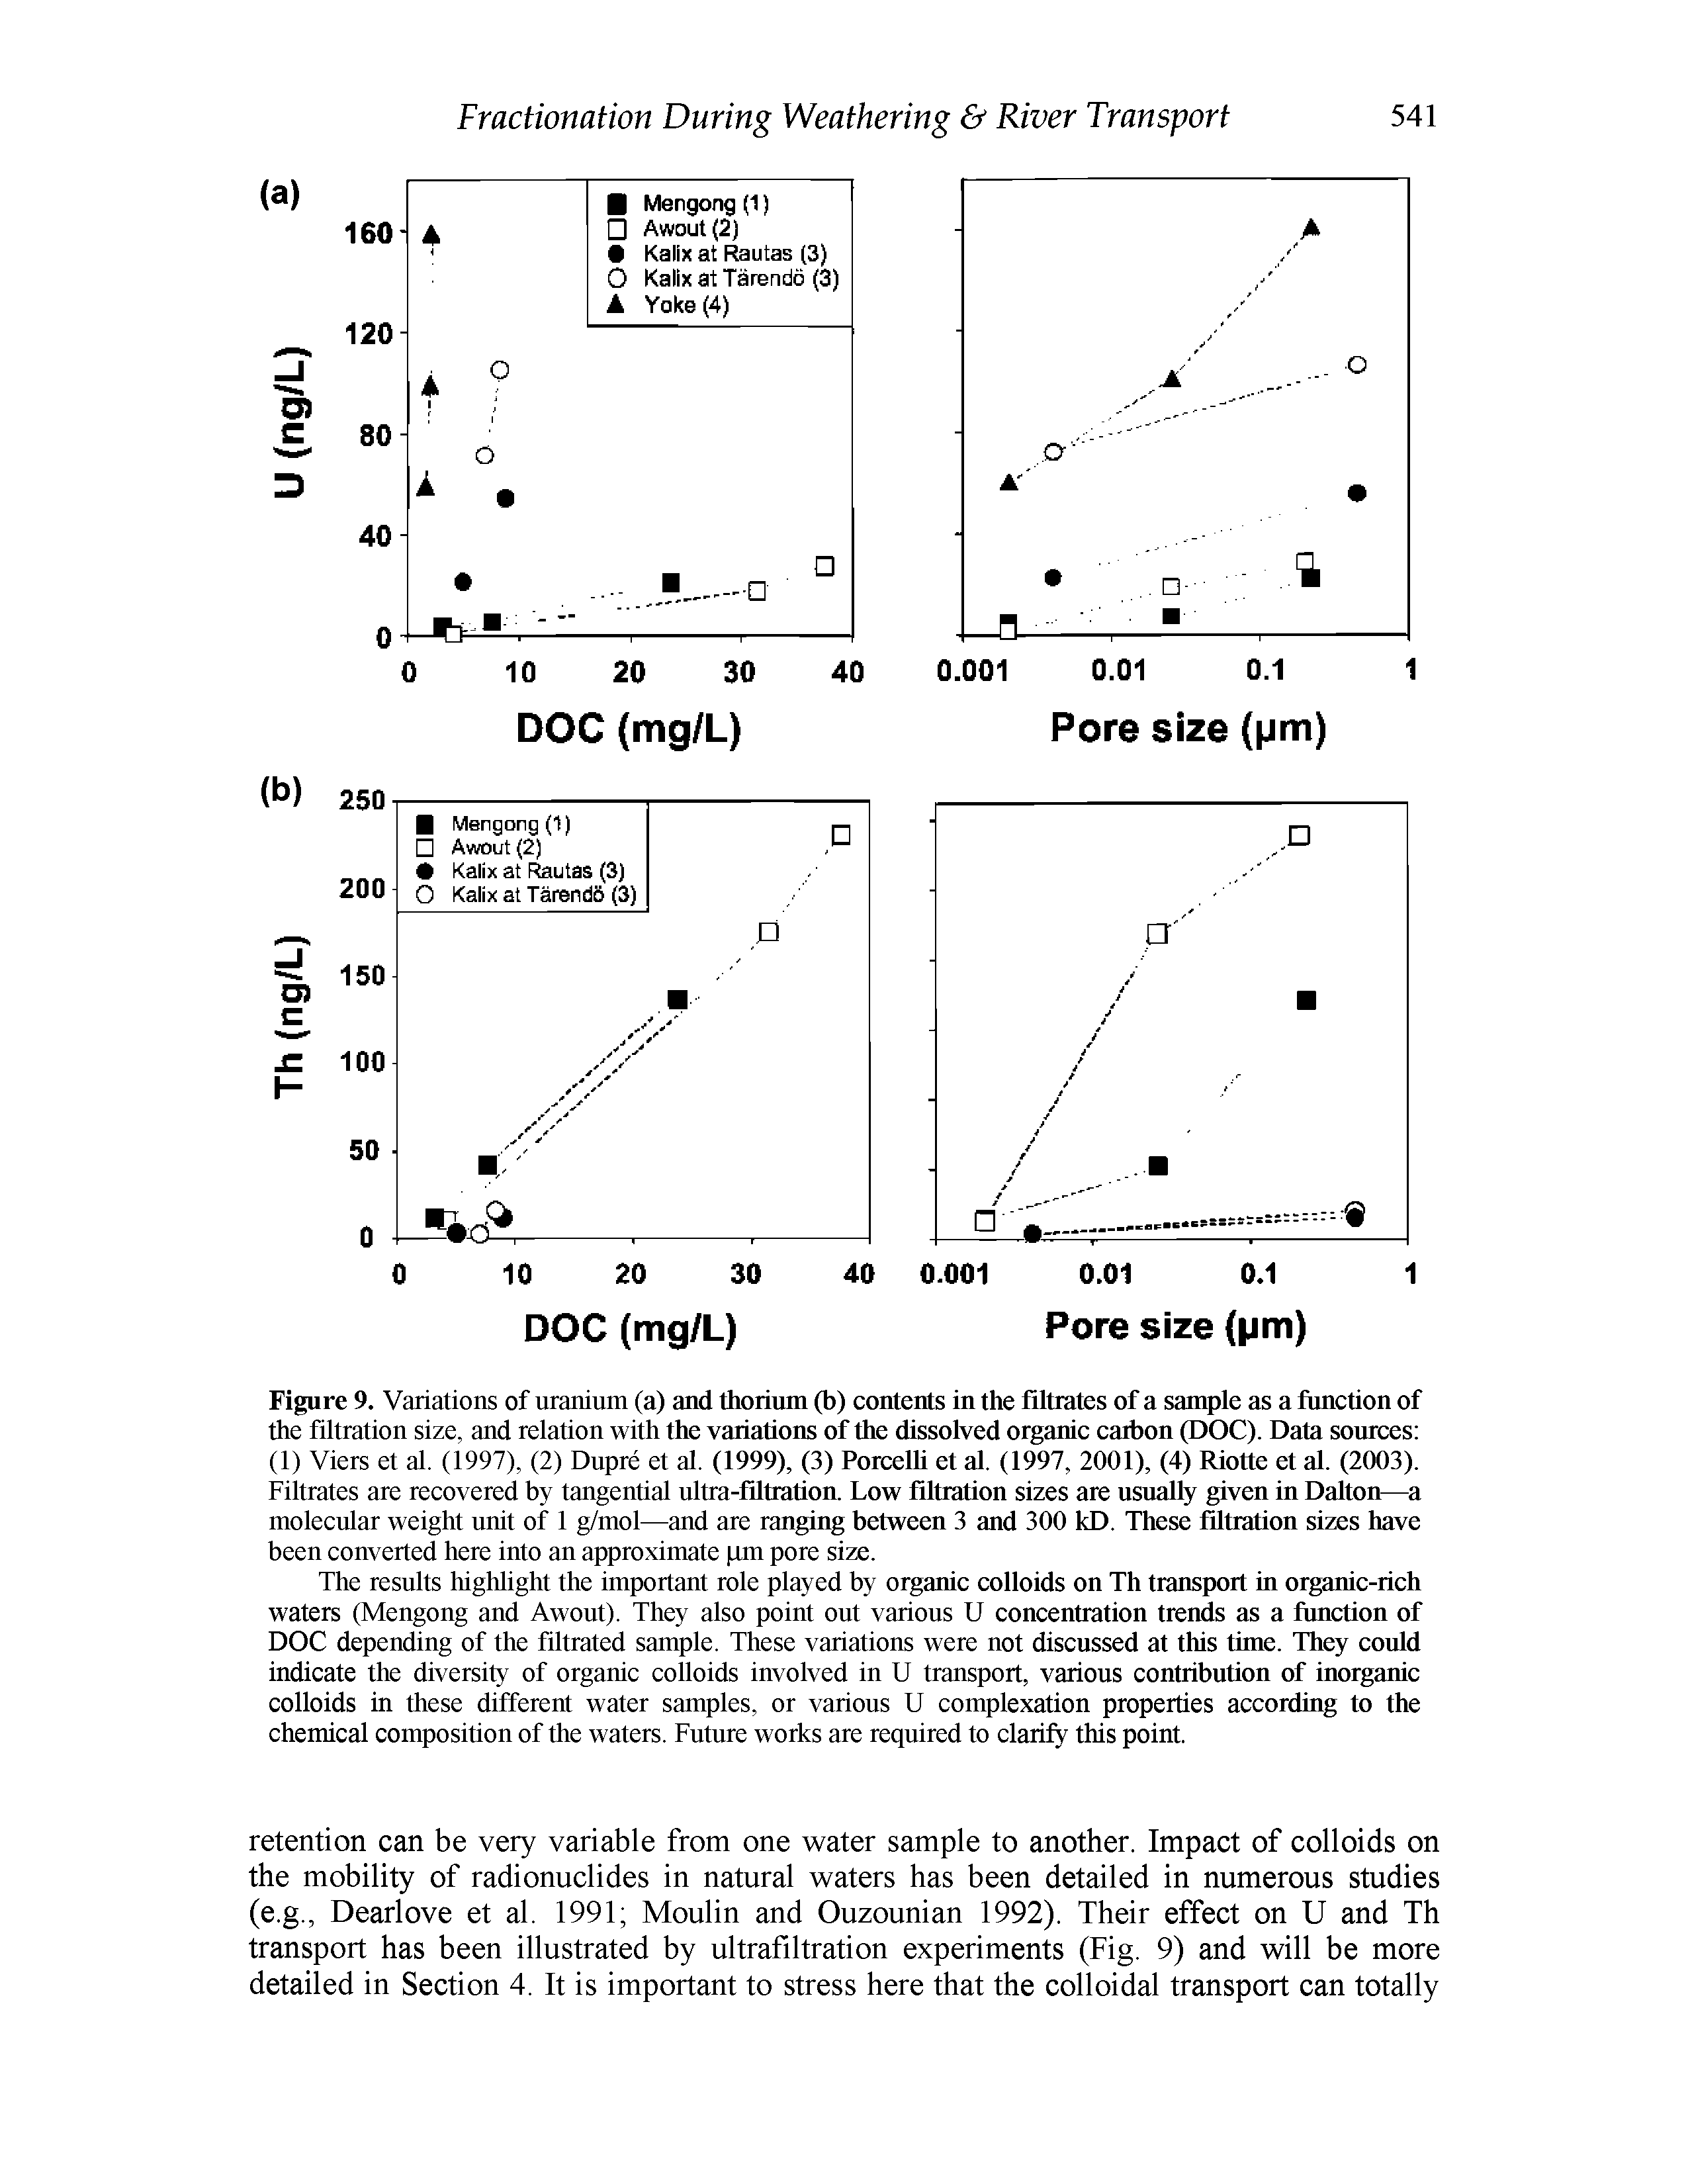 Figure 9. Variations of uranium (a) and thorium (b) contents in the filtrates of a sample as a function of the filtration size, and relation with the variations of the dissolved organic carbon (DOC). Data sources (1) Viers et al. (1997), (2) Dupre et al. (1999), (3) Porcelh et al. (1997, 2001), (4) Riotte et al. (2003). Filtrates are recovered by tangential ultra-filtration. Low filtration sizes are usually given in Dalton—a molecular weight unit of 1 g/mol—and are ranging between 3 and 300 kD. These filtration sizes have been converted here into an approximate rm pore size.